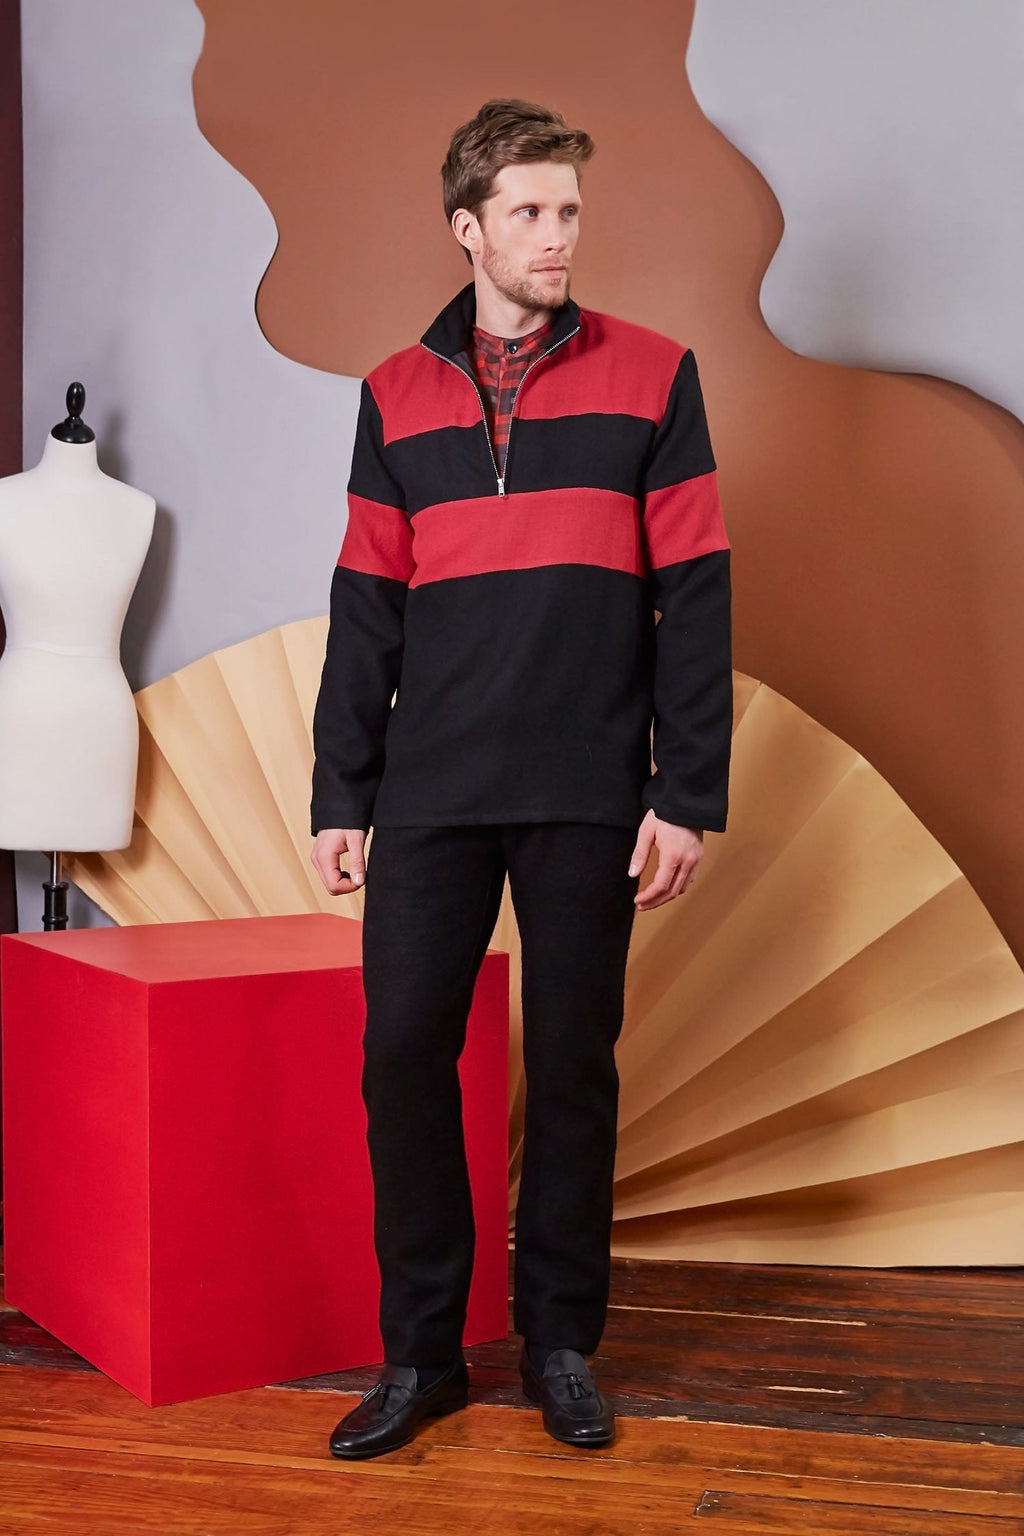 Lavanya Coodly Men's Fashion - Men's Clothing - Sweaters - Pullovers XS / Black/Coral Lavanya Coodly Men's Cliff Black and Coral Merino Wool Sweater